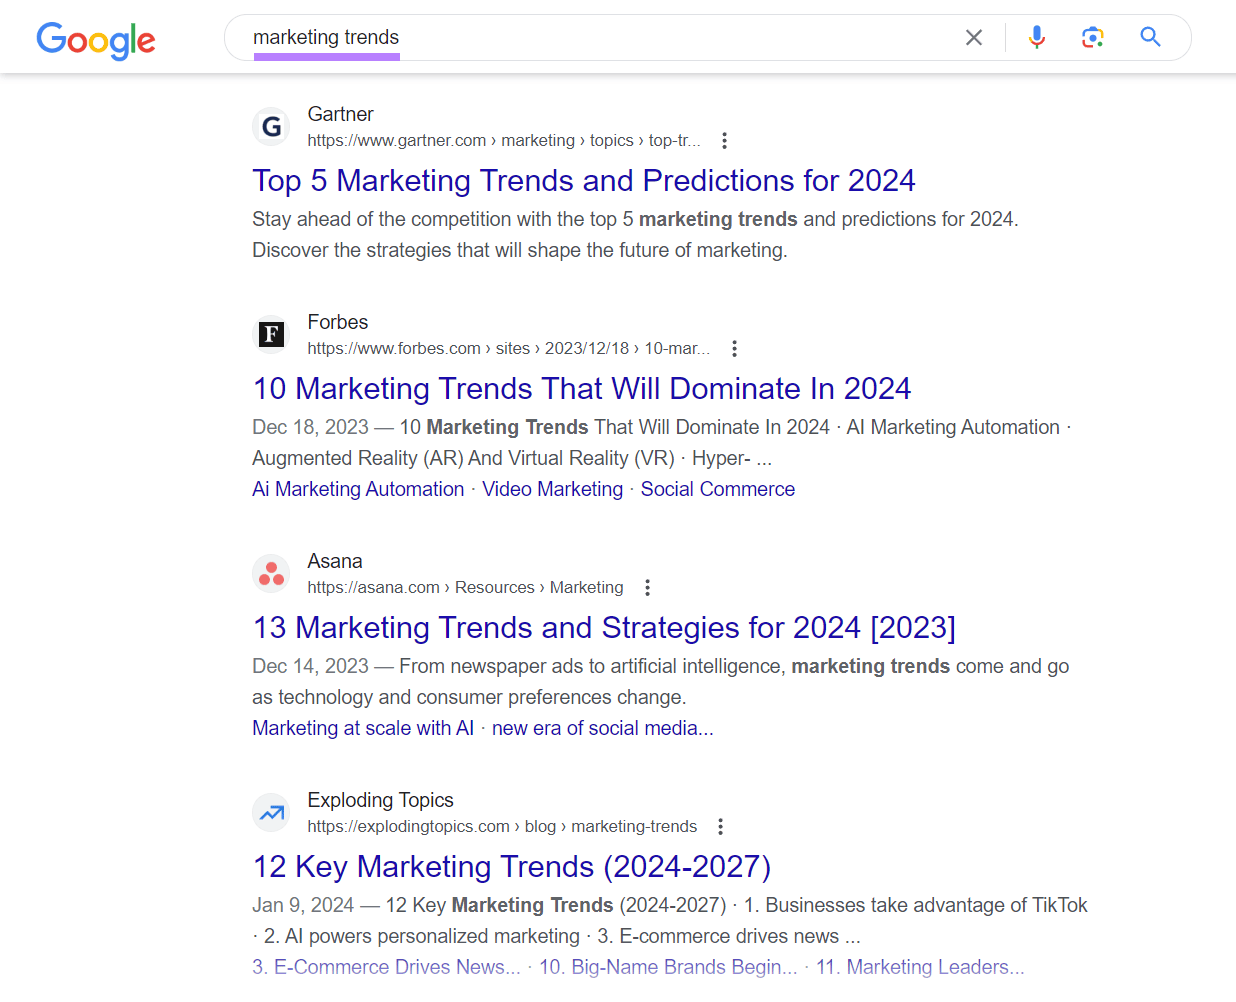 Top of Google SERP for "marketing trends" query showing the year "2024" in their titles